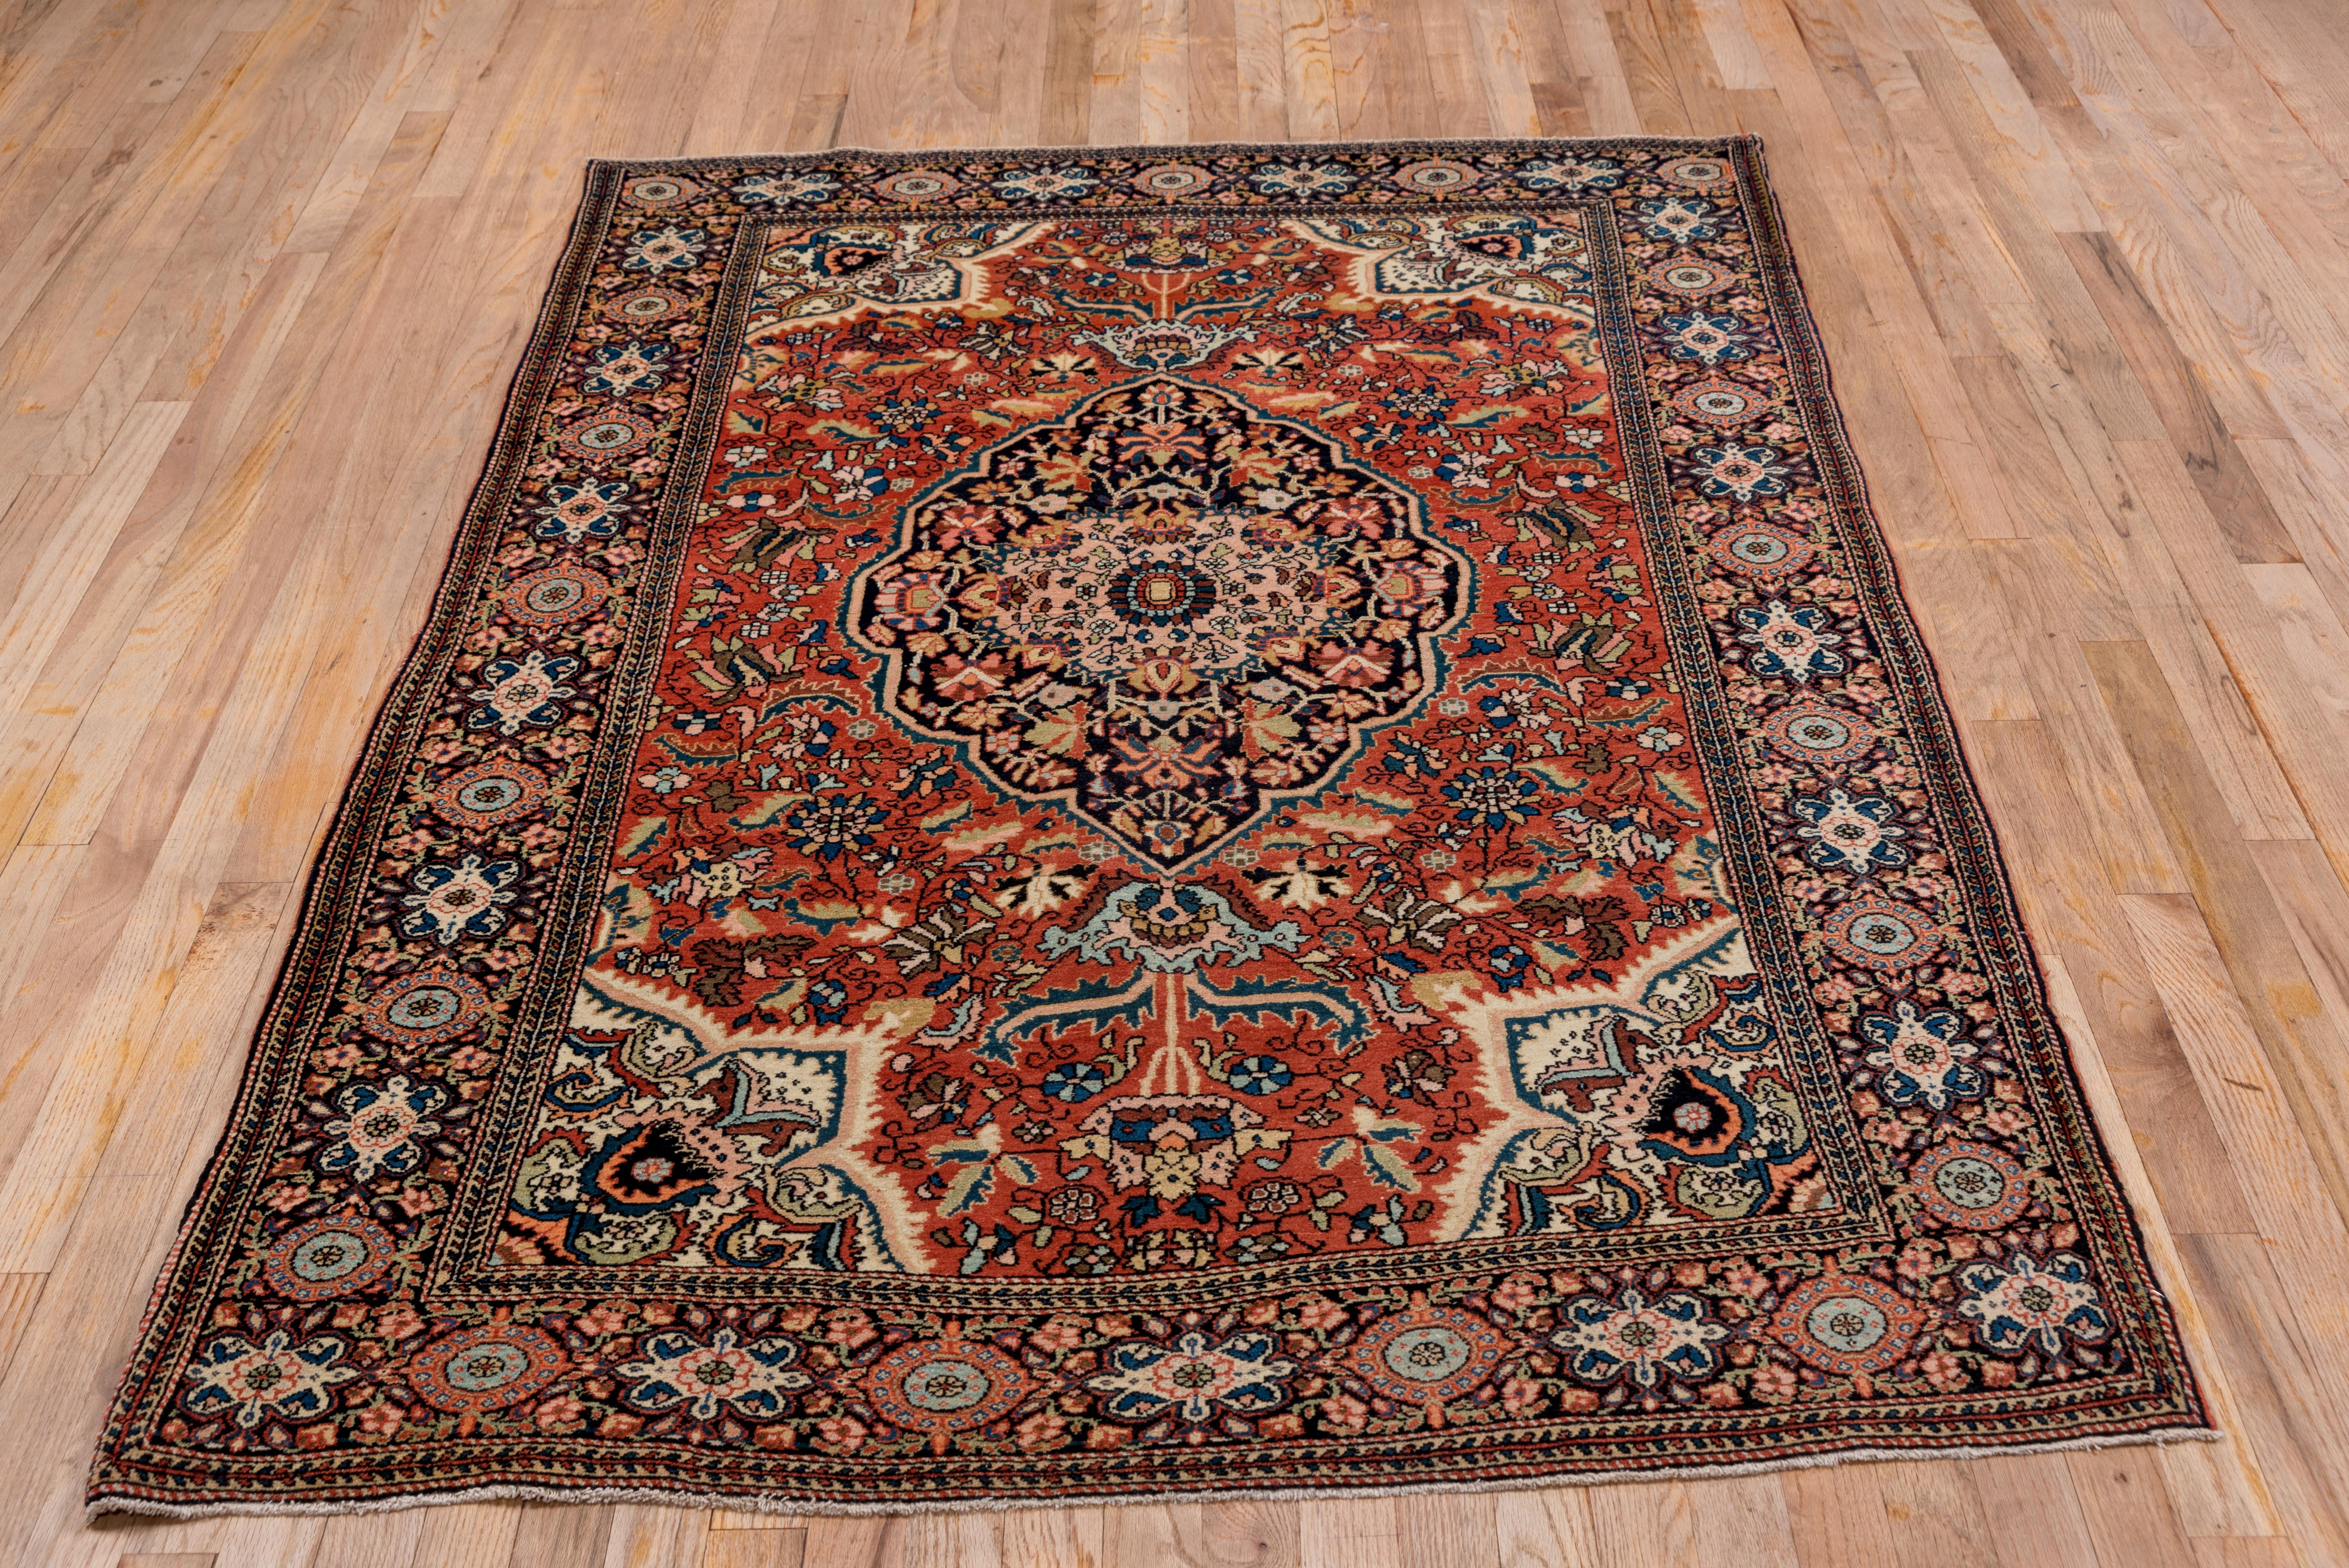 Hand-Knotted 1910s Antique Persian Farahan Sarouk Rug, Red Field, Great Condition For Sale